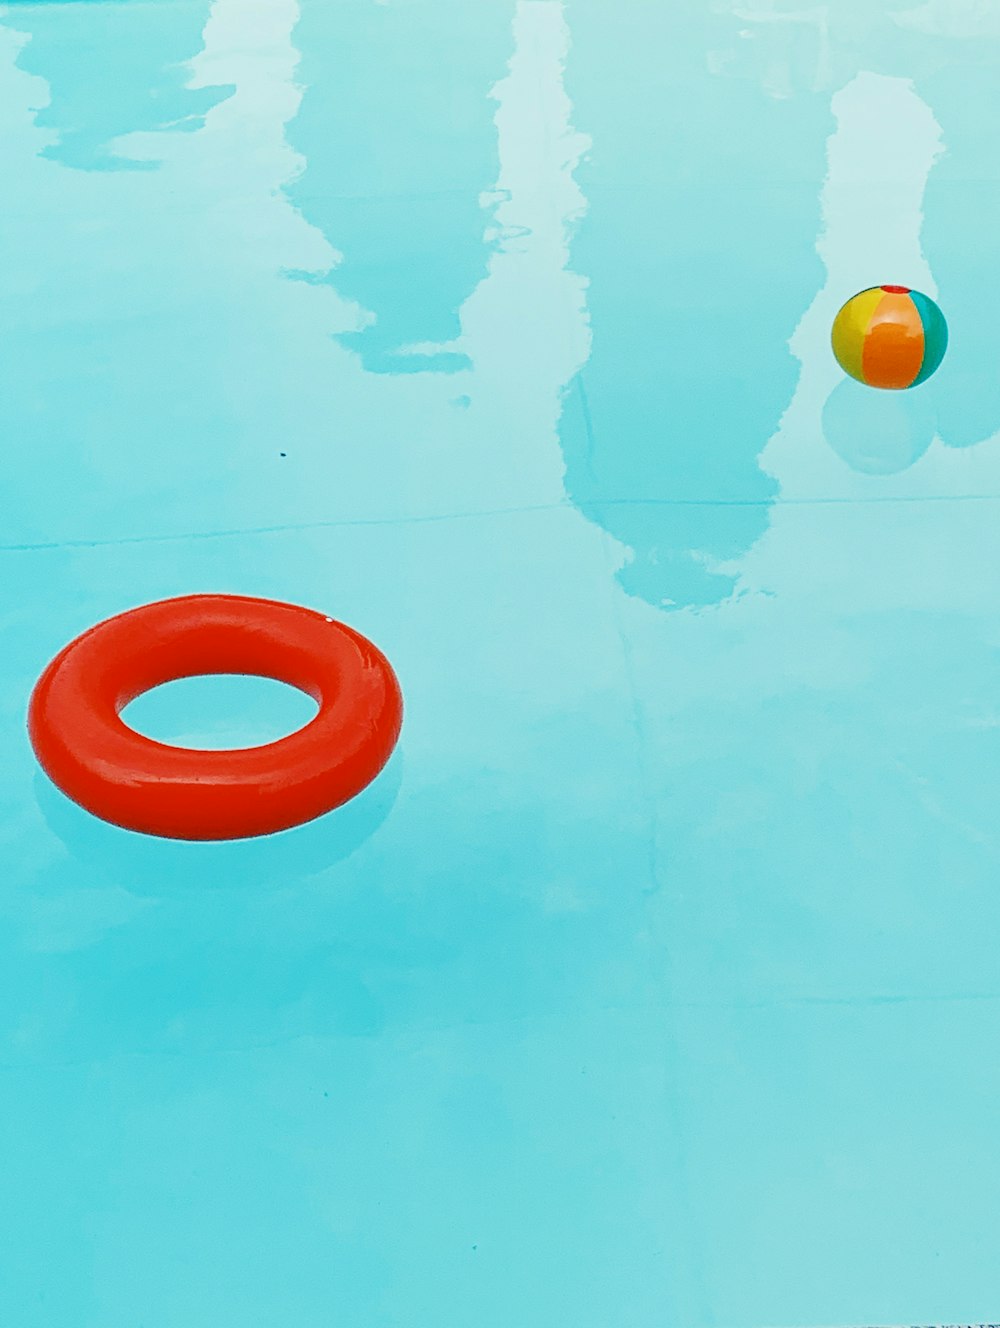 ring float on pool